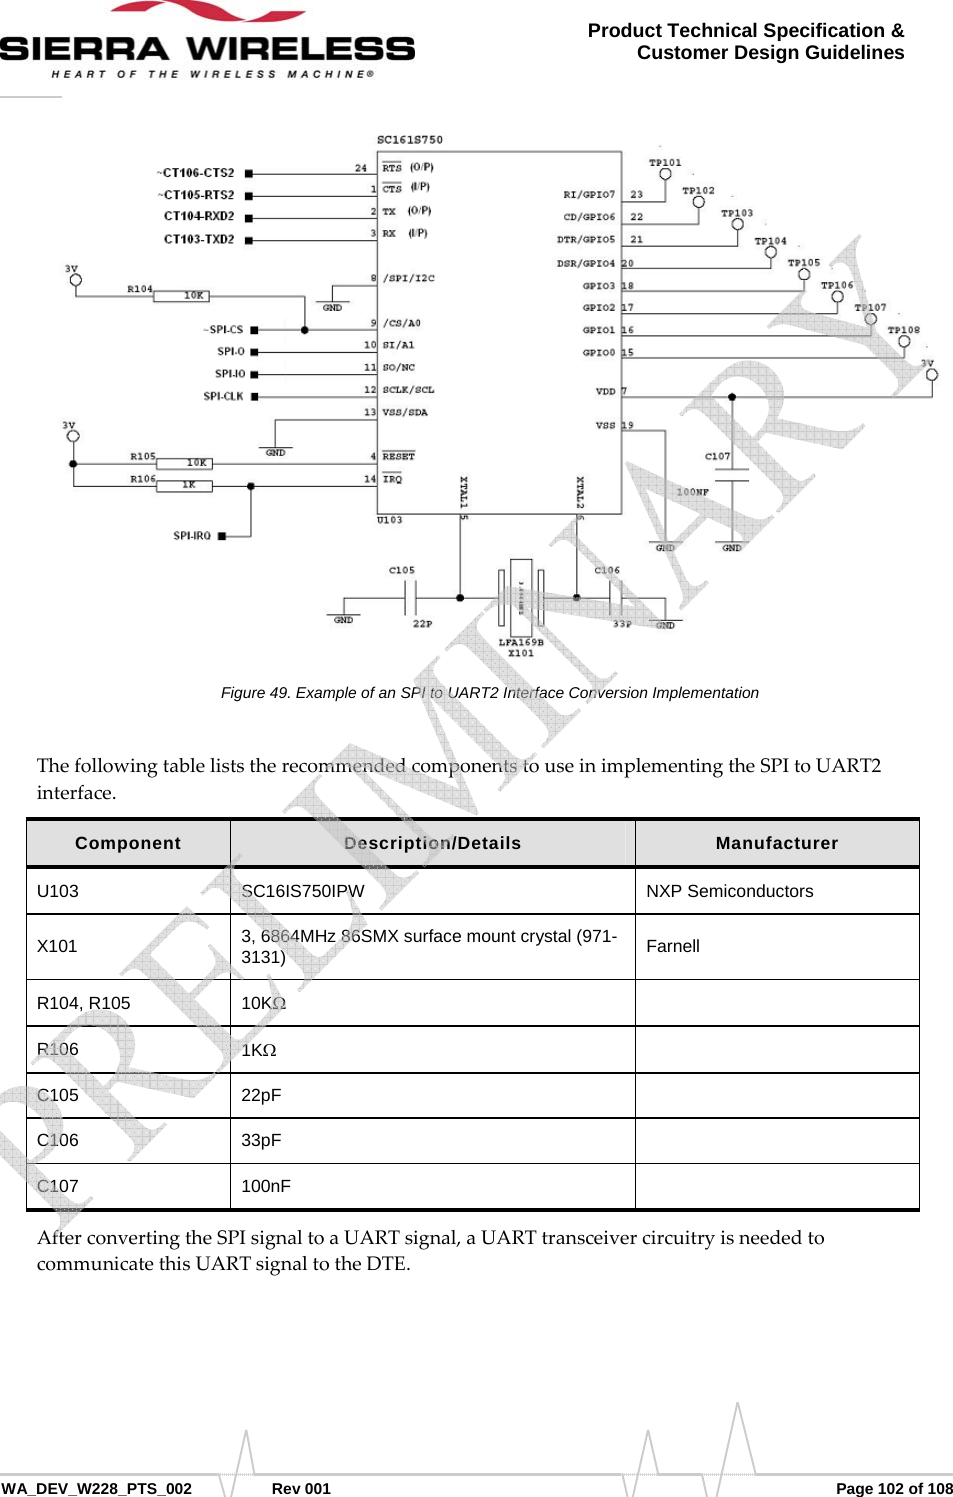      WA_DEV_W228_PTS_002 Rev 001  Page 102 of 108 Product Technical Specification &amp; Customer Design Guidelines Figure 49. Example of an SPI to UART2 Interface Conversion Implementation ThefollowingtableliststherecommendedcomponentstouseinimplementingtheSPItoUART2interface.Component  Description/Details  Manufacturer U103 SC16IS750IPW  NXP Semiconductors X101  3, 6864MHz 86SMX surface mount crystal (971-3131)  Farnell R104, R105  10KΩ  R106  1KΩ  C105 22pF   C106 33pF   C107 100nF   AfterconvertingtheSPIsignaltoaUARTsignal,aUARTtransceivercircuitryisneededtocommunicatethisUARTsignaltotheDTE.   